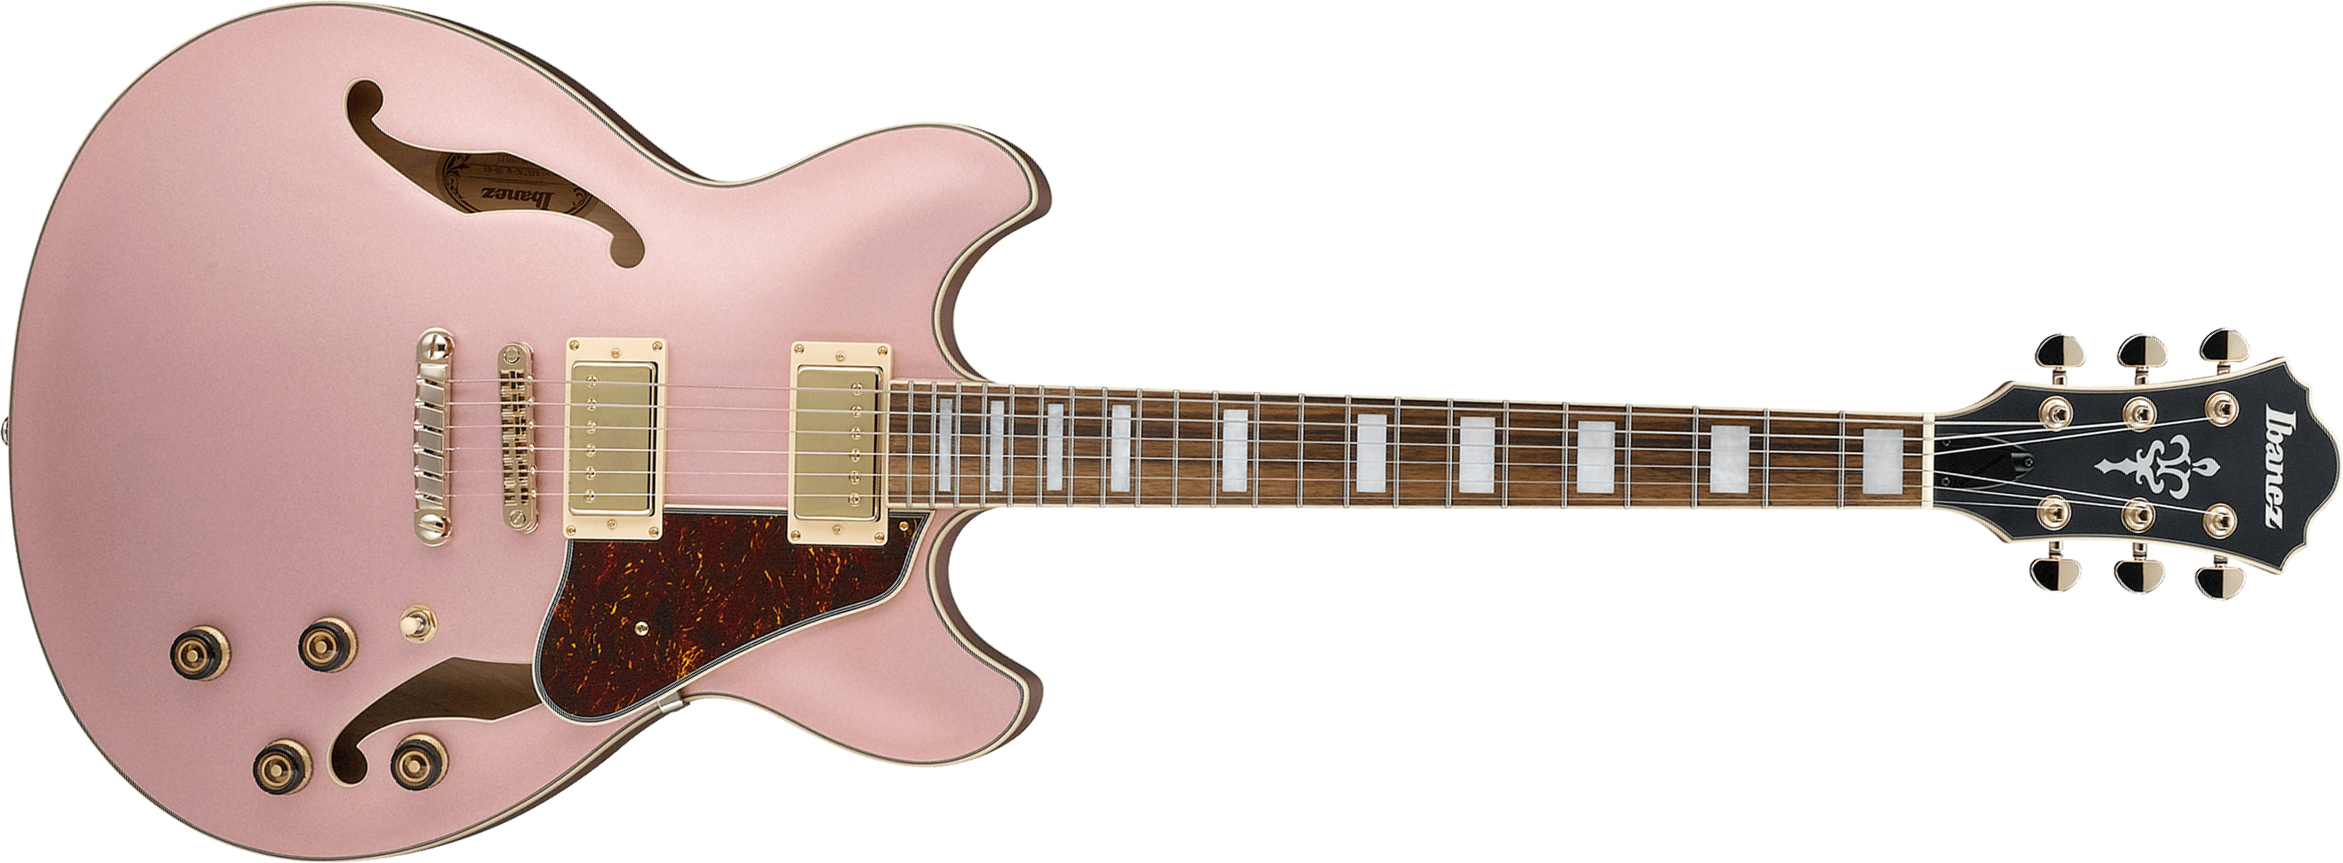 Ibanez As73g Rgf Artcore Hh Ht Noy - Rose Gold Metallic Flat - Semi-hollow electric guitar - Main picture